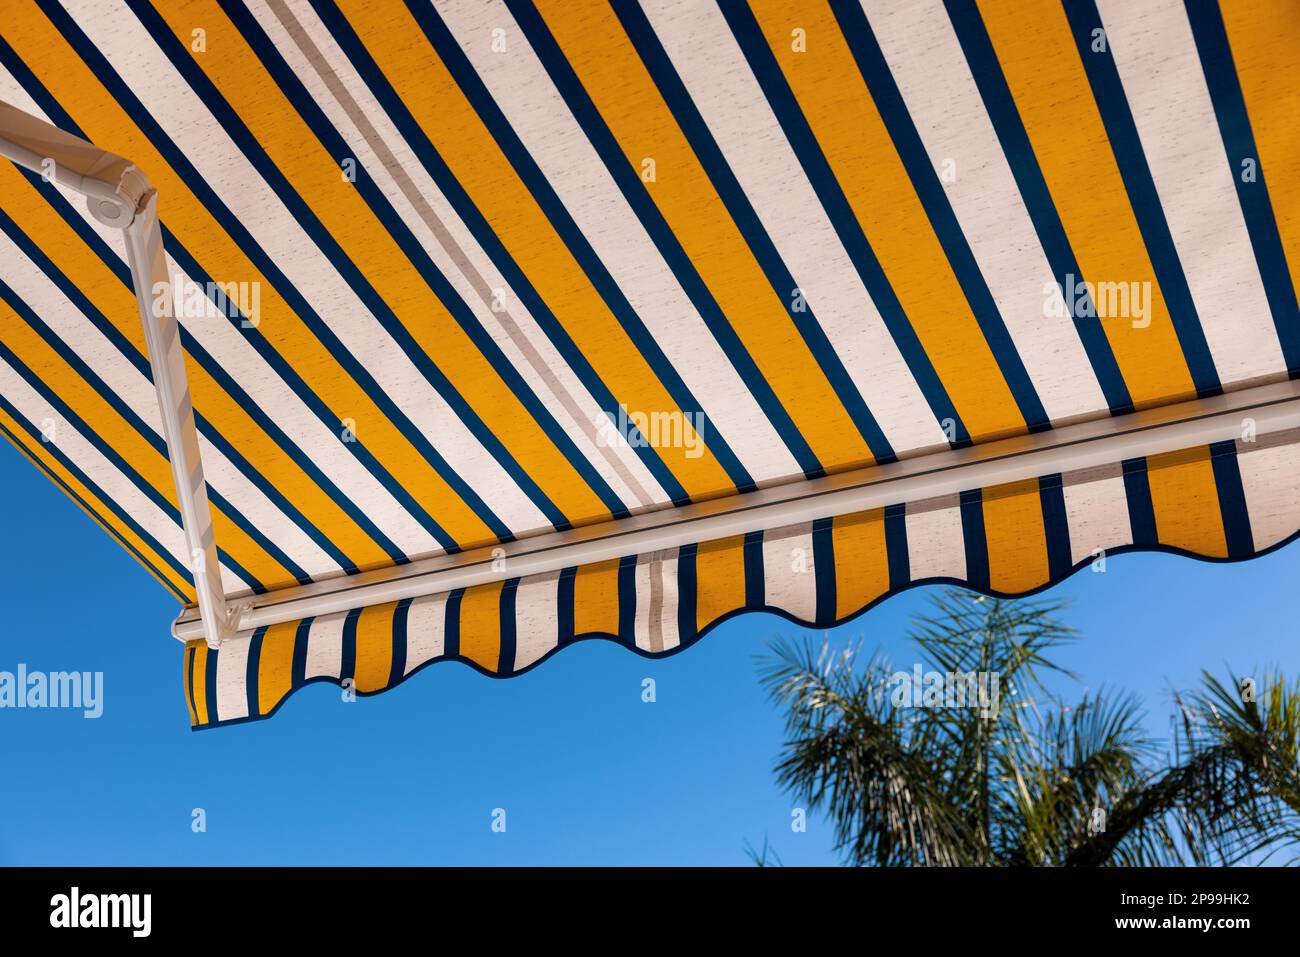 striped fabric awning against blue sky Stock Photo